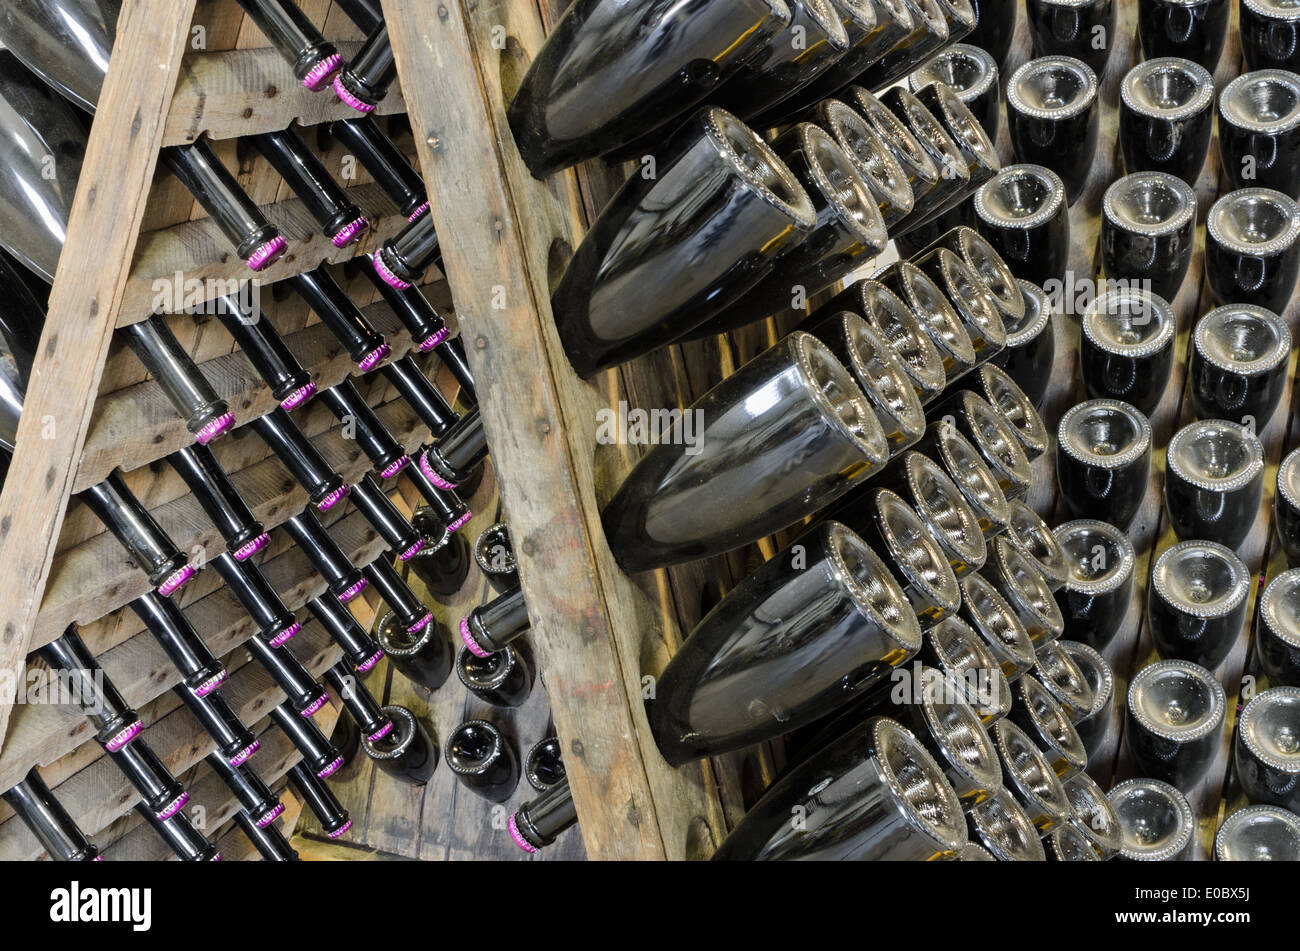 Dusty bottles with brut sparkling wine on wooden rack in winery vault Stock Photo